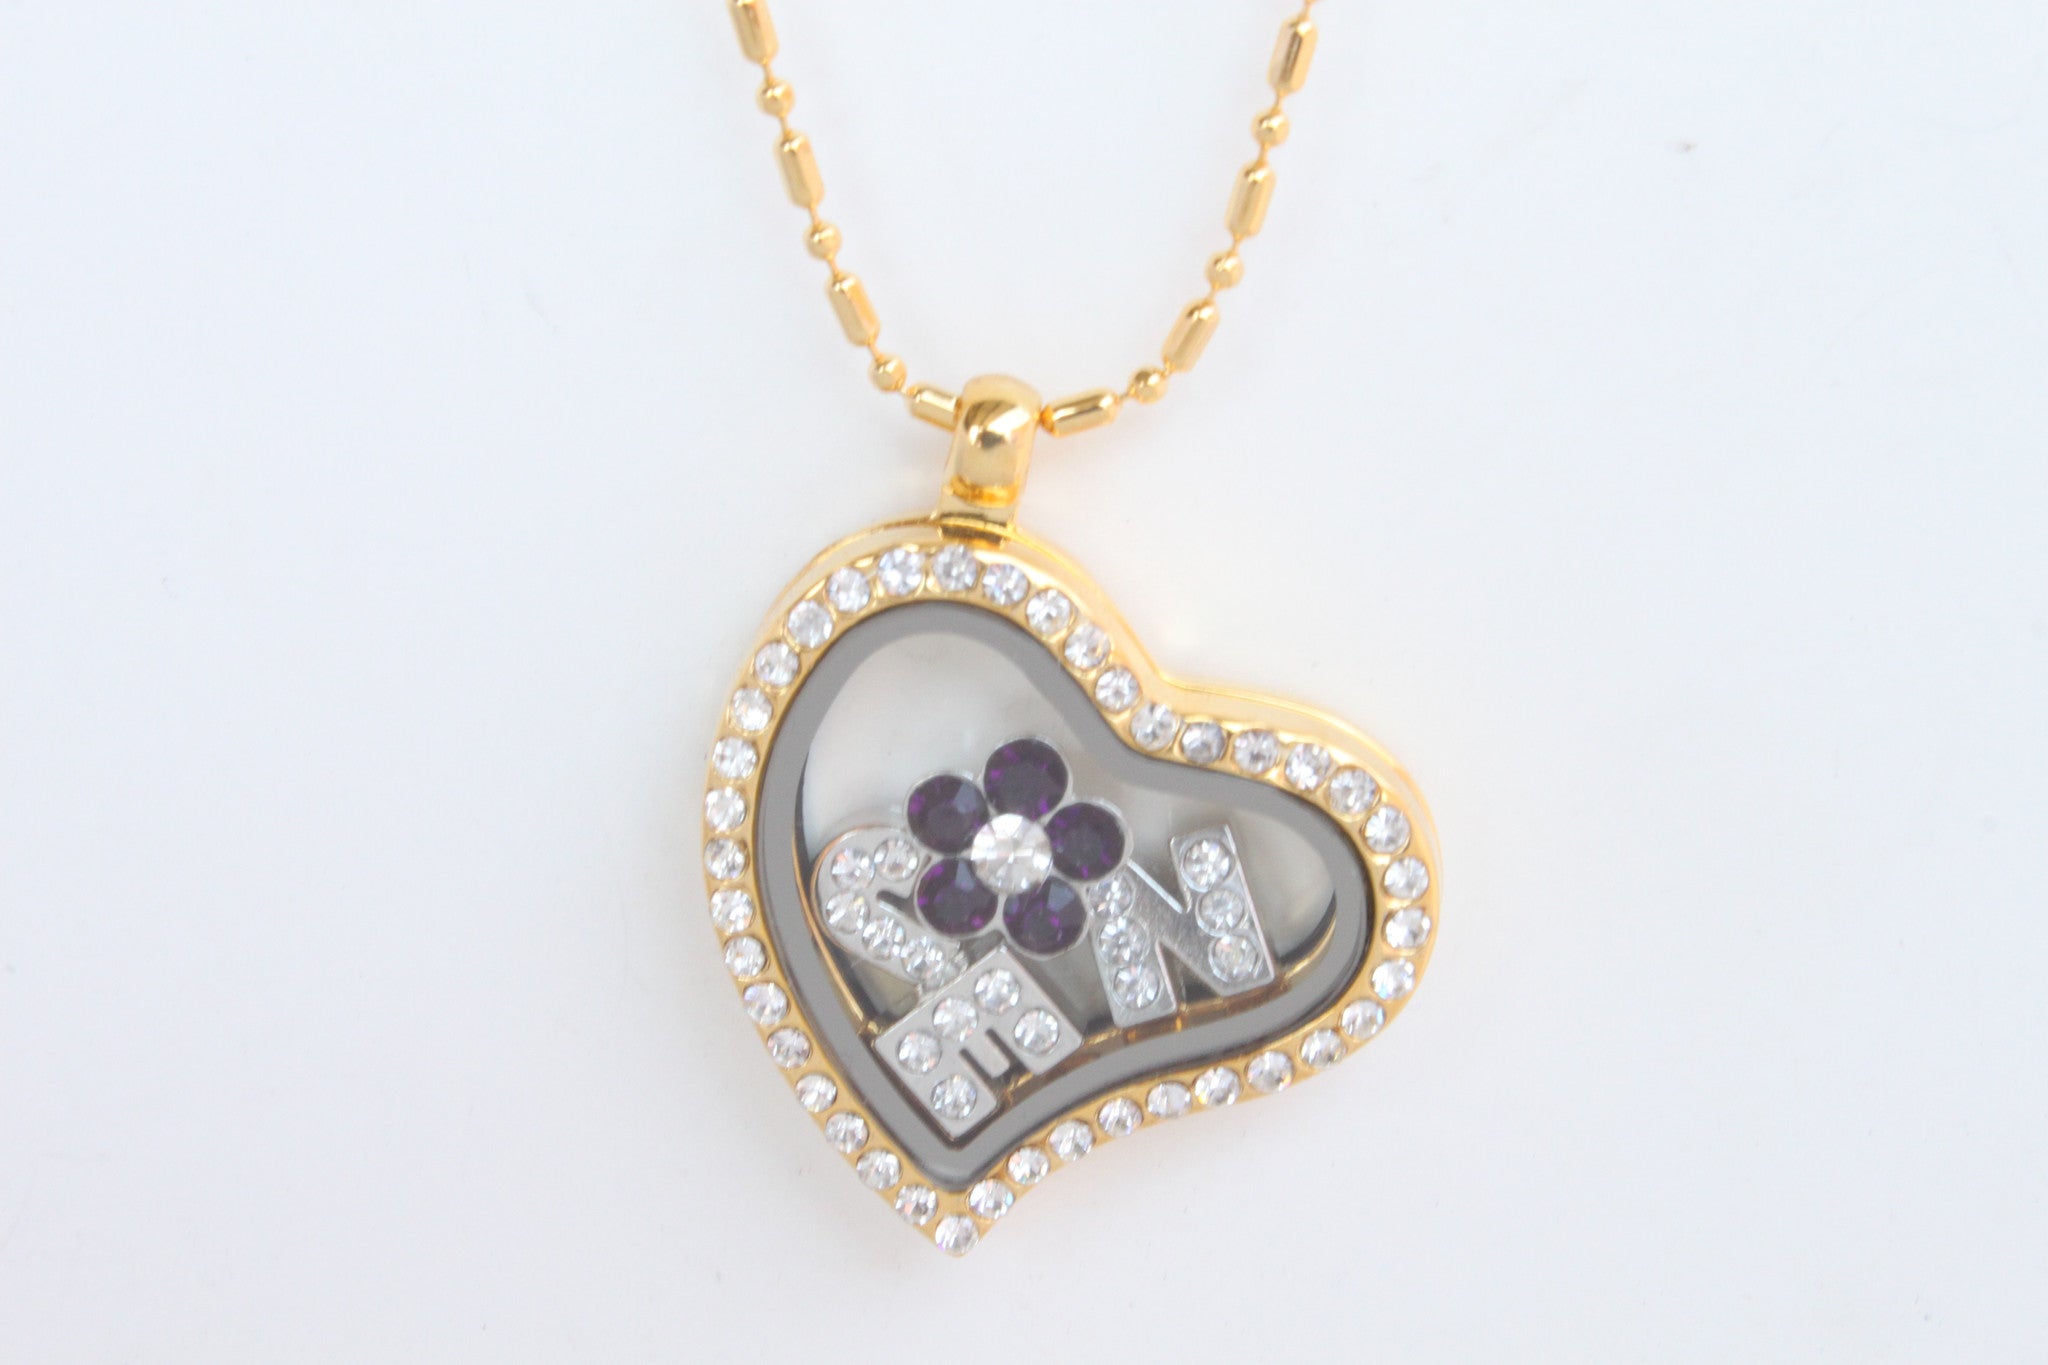 Floating Locket Necklace with Matching Chain and Choice of 6 Charms (Gold Heart)